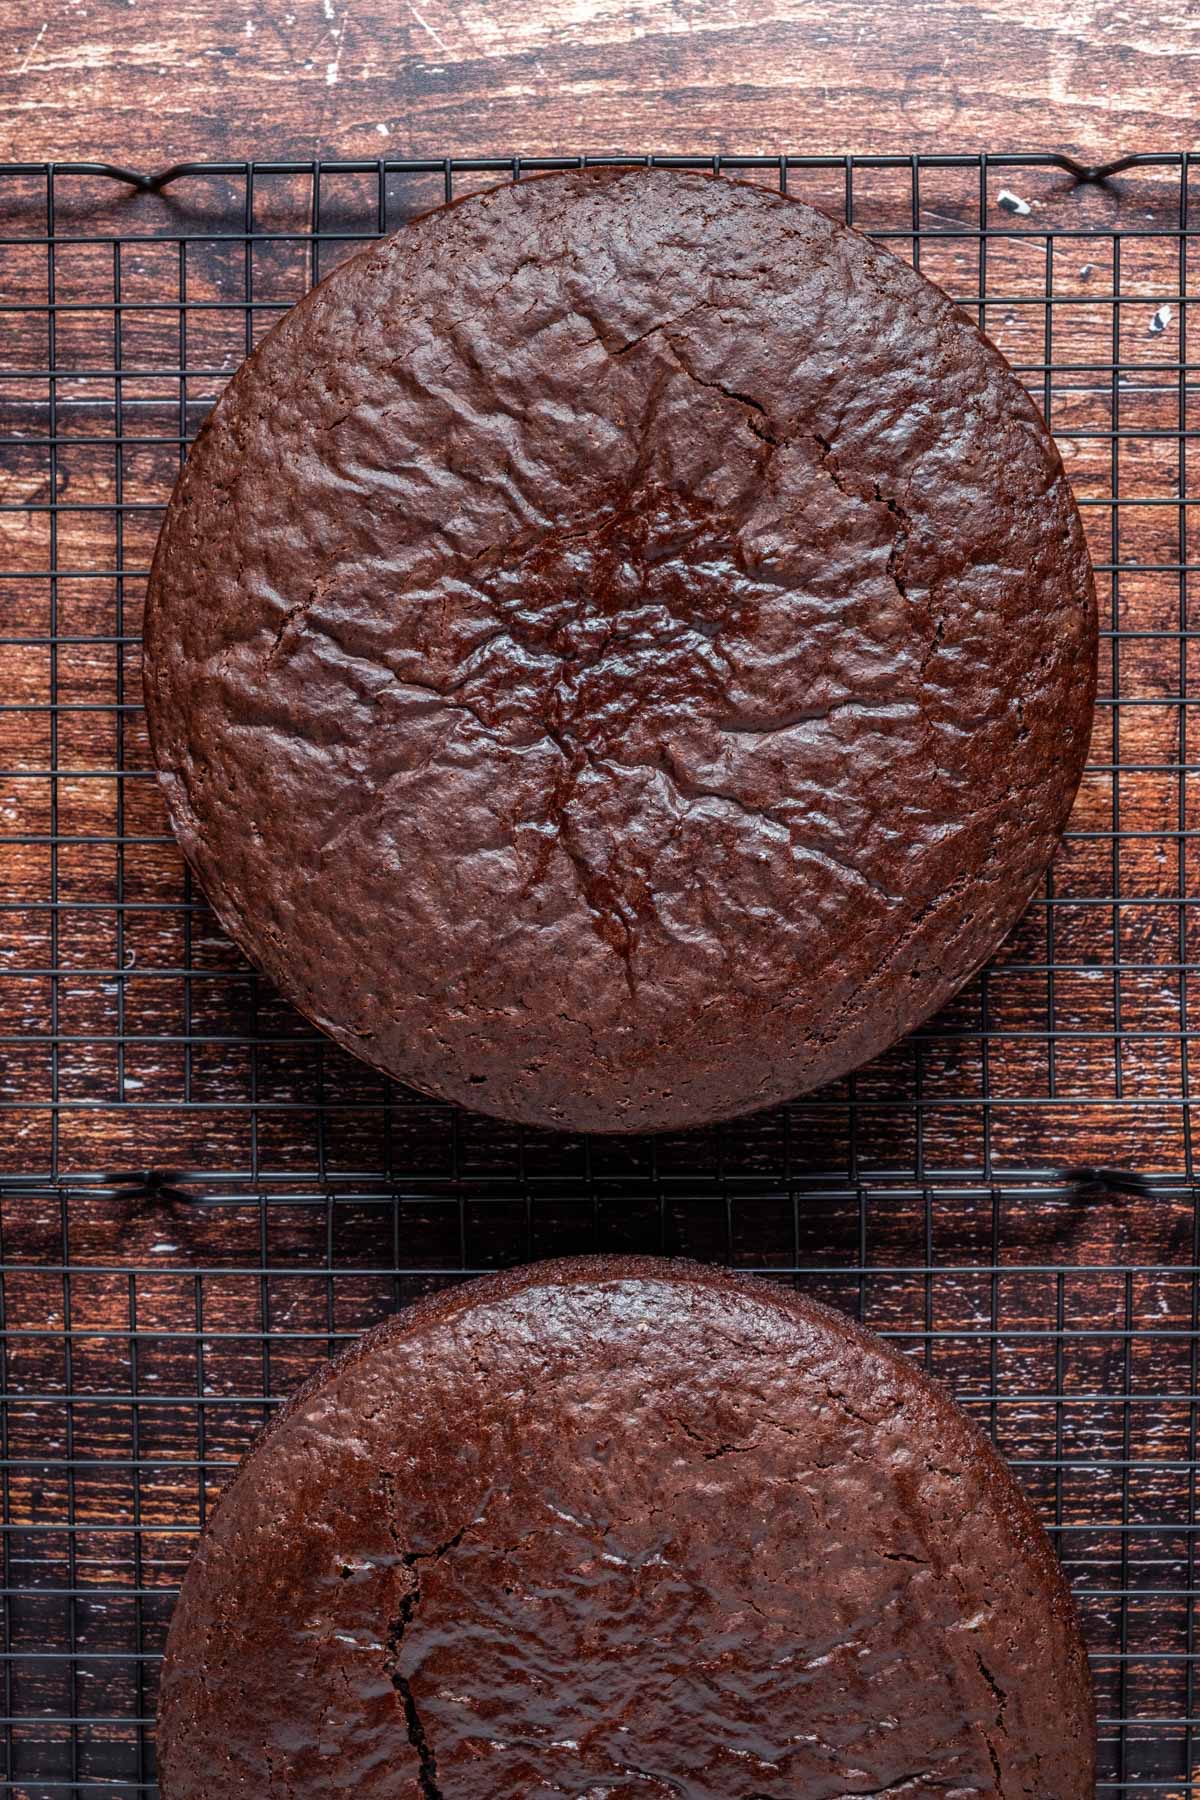 Vegan chocolate fudge cakes cooling on a wire cooling rack.